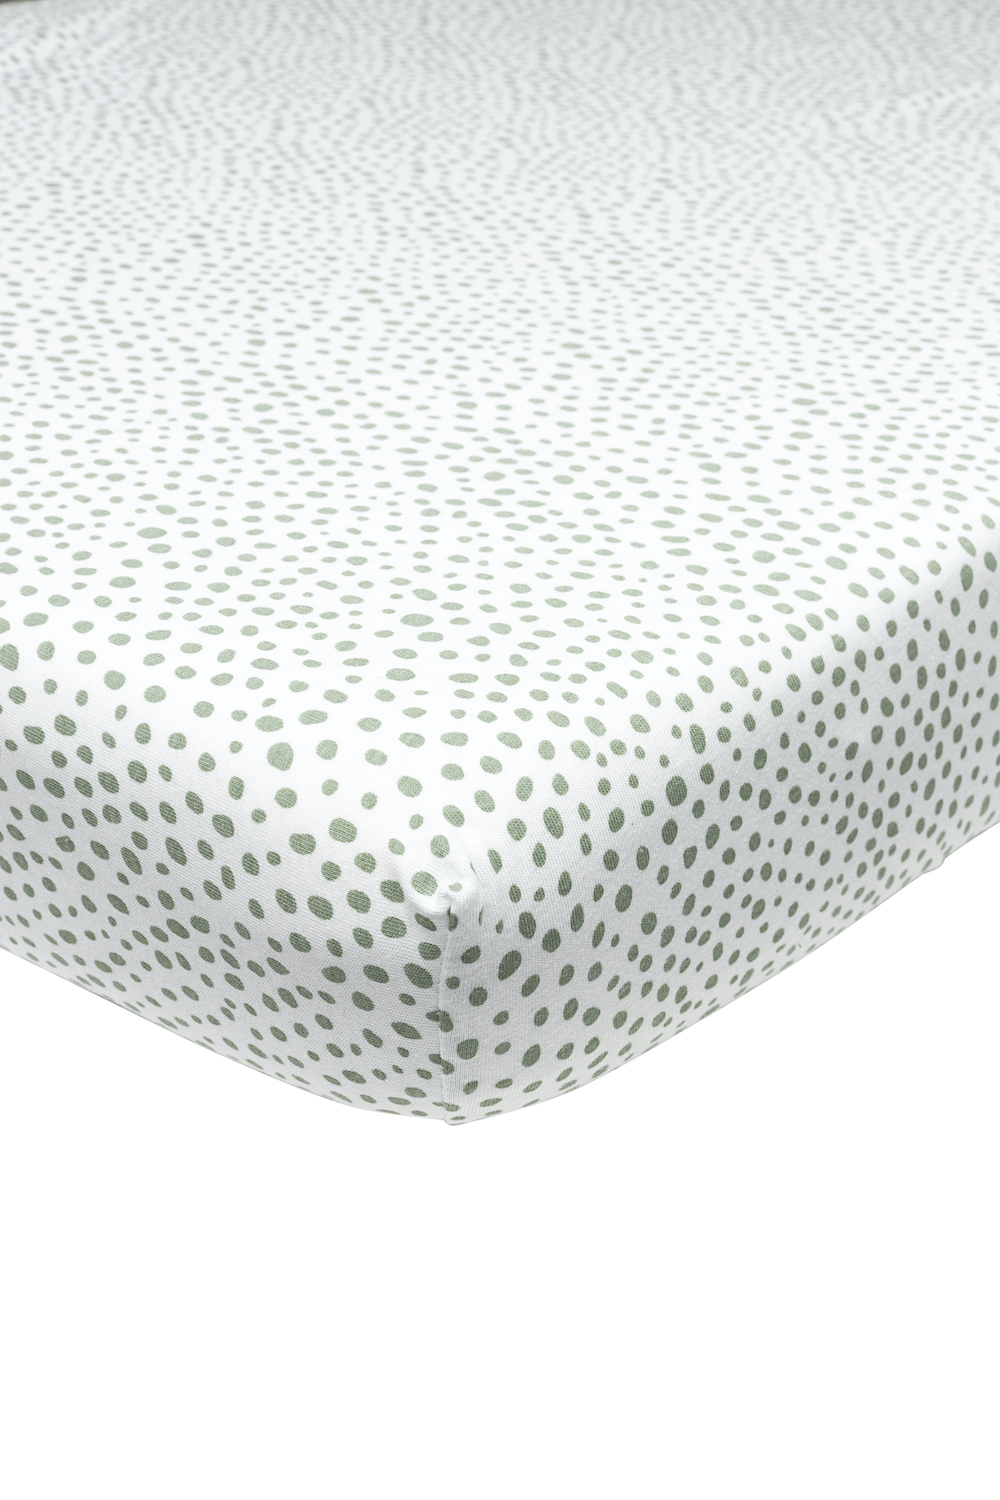 Fitted sheet juniorbed Cheetah - forest green - 70x140/150cm